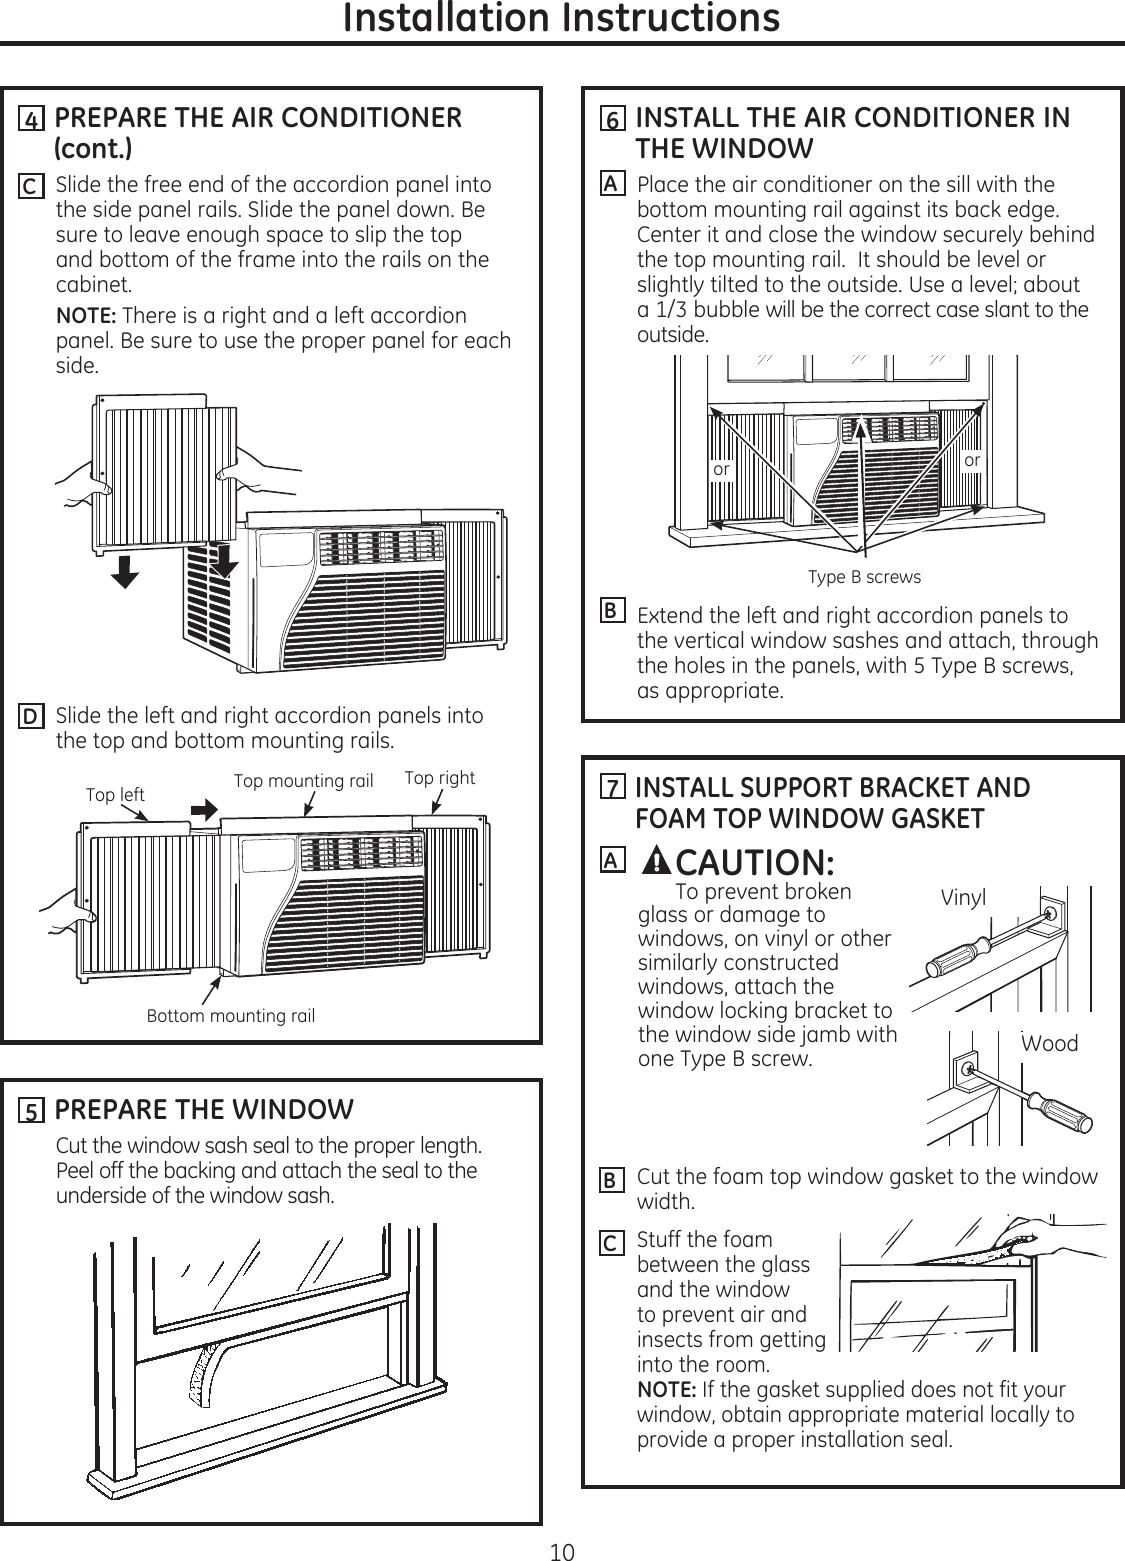 Installation Instructions  PREPARE THE AIR CONDITIONER (cont.)Slide the free end of the accordion panel into the side panel rails. Slide the panel down. Be sure to leave enough space to slip the top and bottom of the frame into the rails on the cabinet.  NOTE: There is a right and a left accordion panel. Be sure to use the proper panel for each side.Slide the left and right accordion panels into the top and bottom mounting rails.4  INSTALL THE AIR CONDITIONER IN THE WINDOWPlace the air conditioner on the sill with the bottom mounting rail against its back edge. Center it and close the window securely behind the top mounting rail.  It should be level or slightly tilted to the outside. Use a level; about a 1/3 bubble will be the correct case slant to the outside.Extend the left and right accordion panels to the vertical window sashes and attach, through the holes in the panels, with 5 Type B screws, as appropriate.6AB  PREPARE THE WINDOW Cut the window sash seal to the proper length. Peel off the backing and attach the seal to the underside of the window sash.5C7  INSTALL SUPPORT BRACKET AND FOAM TOP WINDOW GASKETCut the foam top window gasket to the window width.Stuff the foam between the glass and the window to prevent air and insects from getting into the room. NOTE: If the gasket supplied does not fit your window, obtain appropriate material locally to provide a proper installation seal.ACAUTION:  To prevent broken glass or damage to windows, on vinyl or other similarly constructed windows, attach the window locking bracket to the window side jamb with one Type B screw.BCWoodVinyl10Top left Top rightDTop mounting railBottom mounting railororType B screws